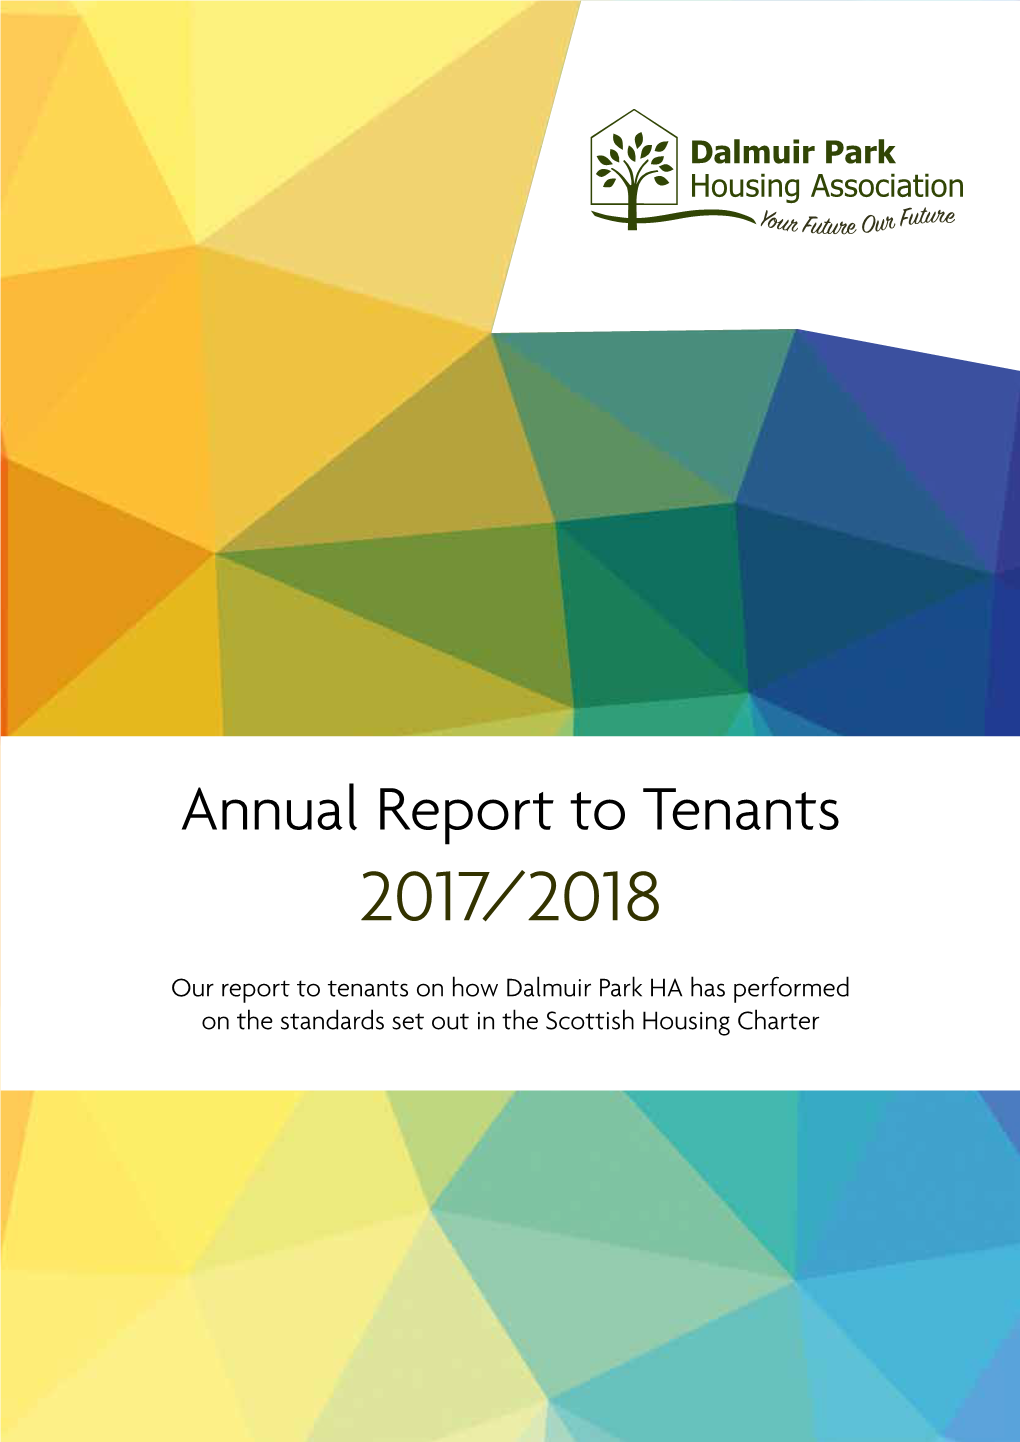 Annual Report to Tenants 2017/2018